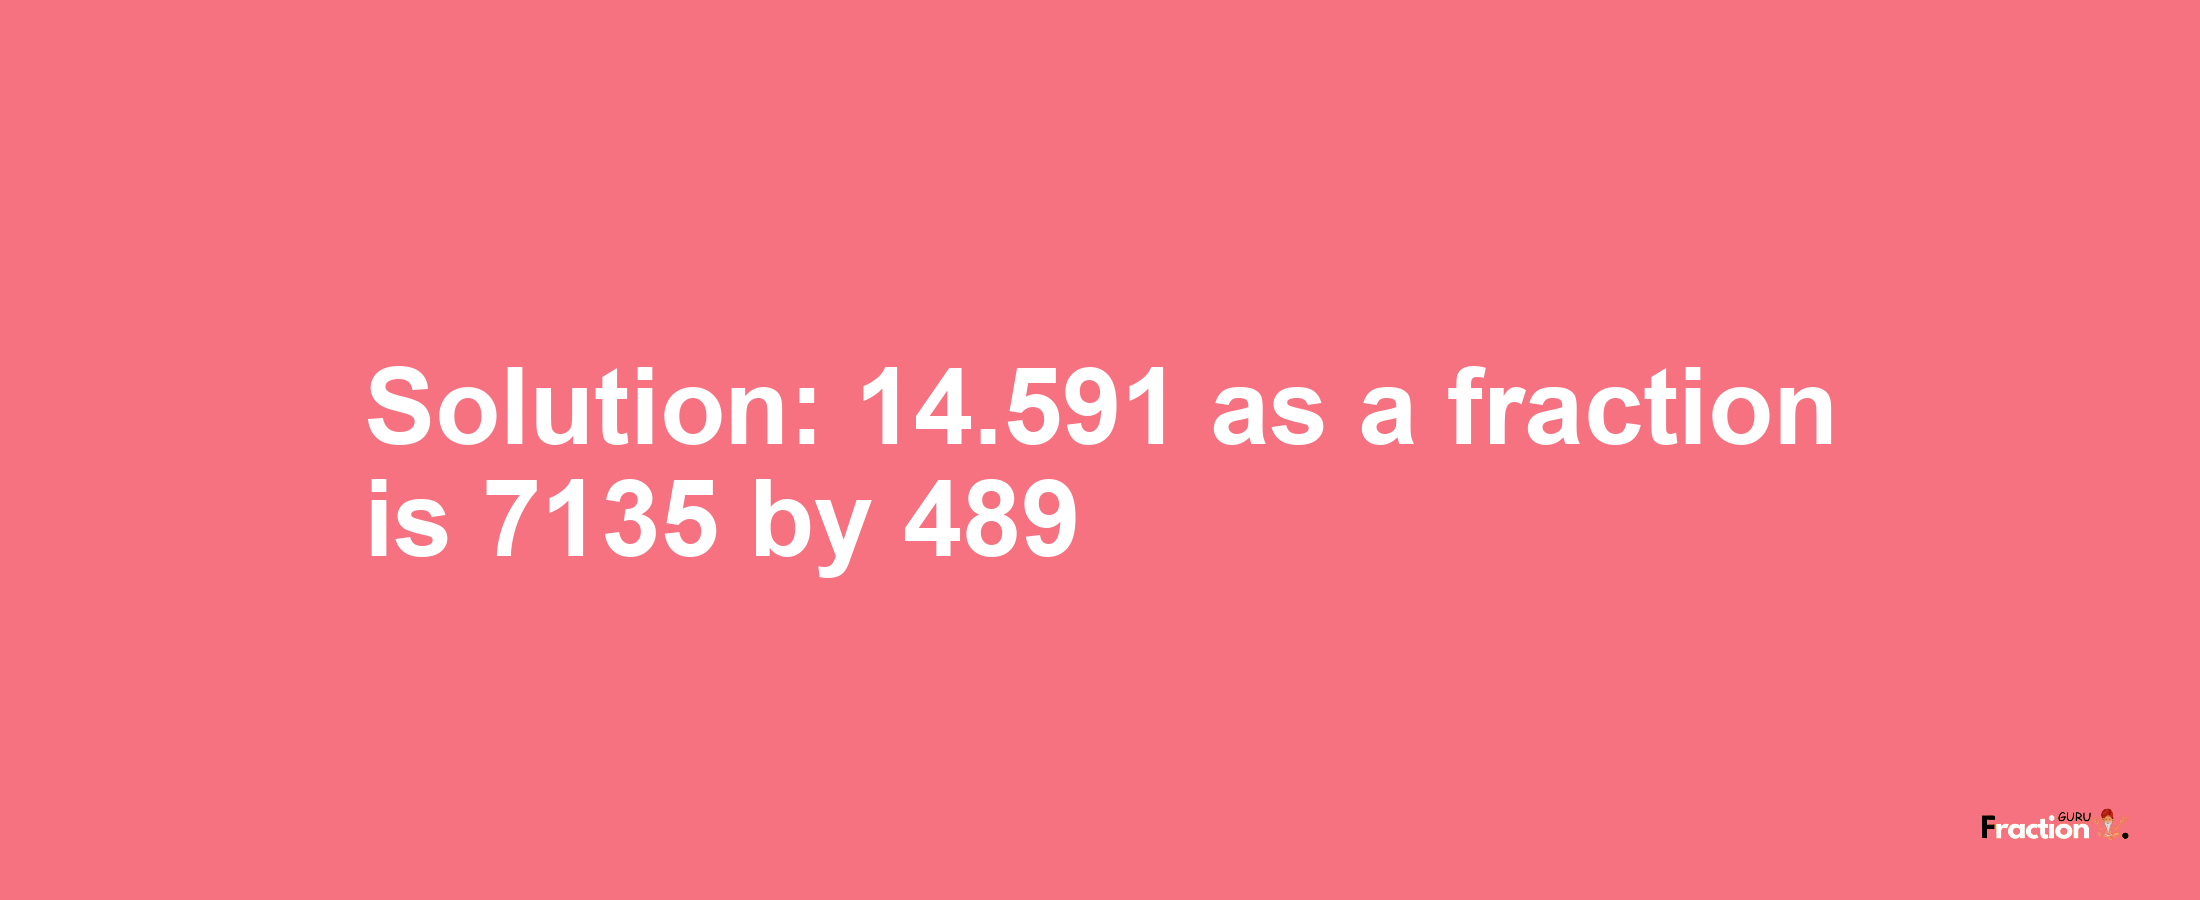 Solution:14.591 as a fraction is 7135/489